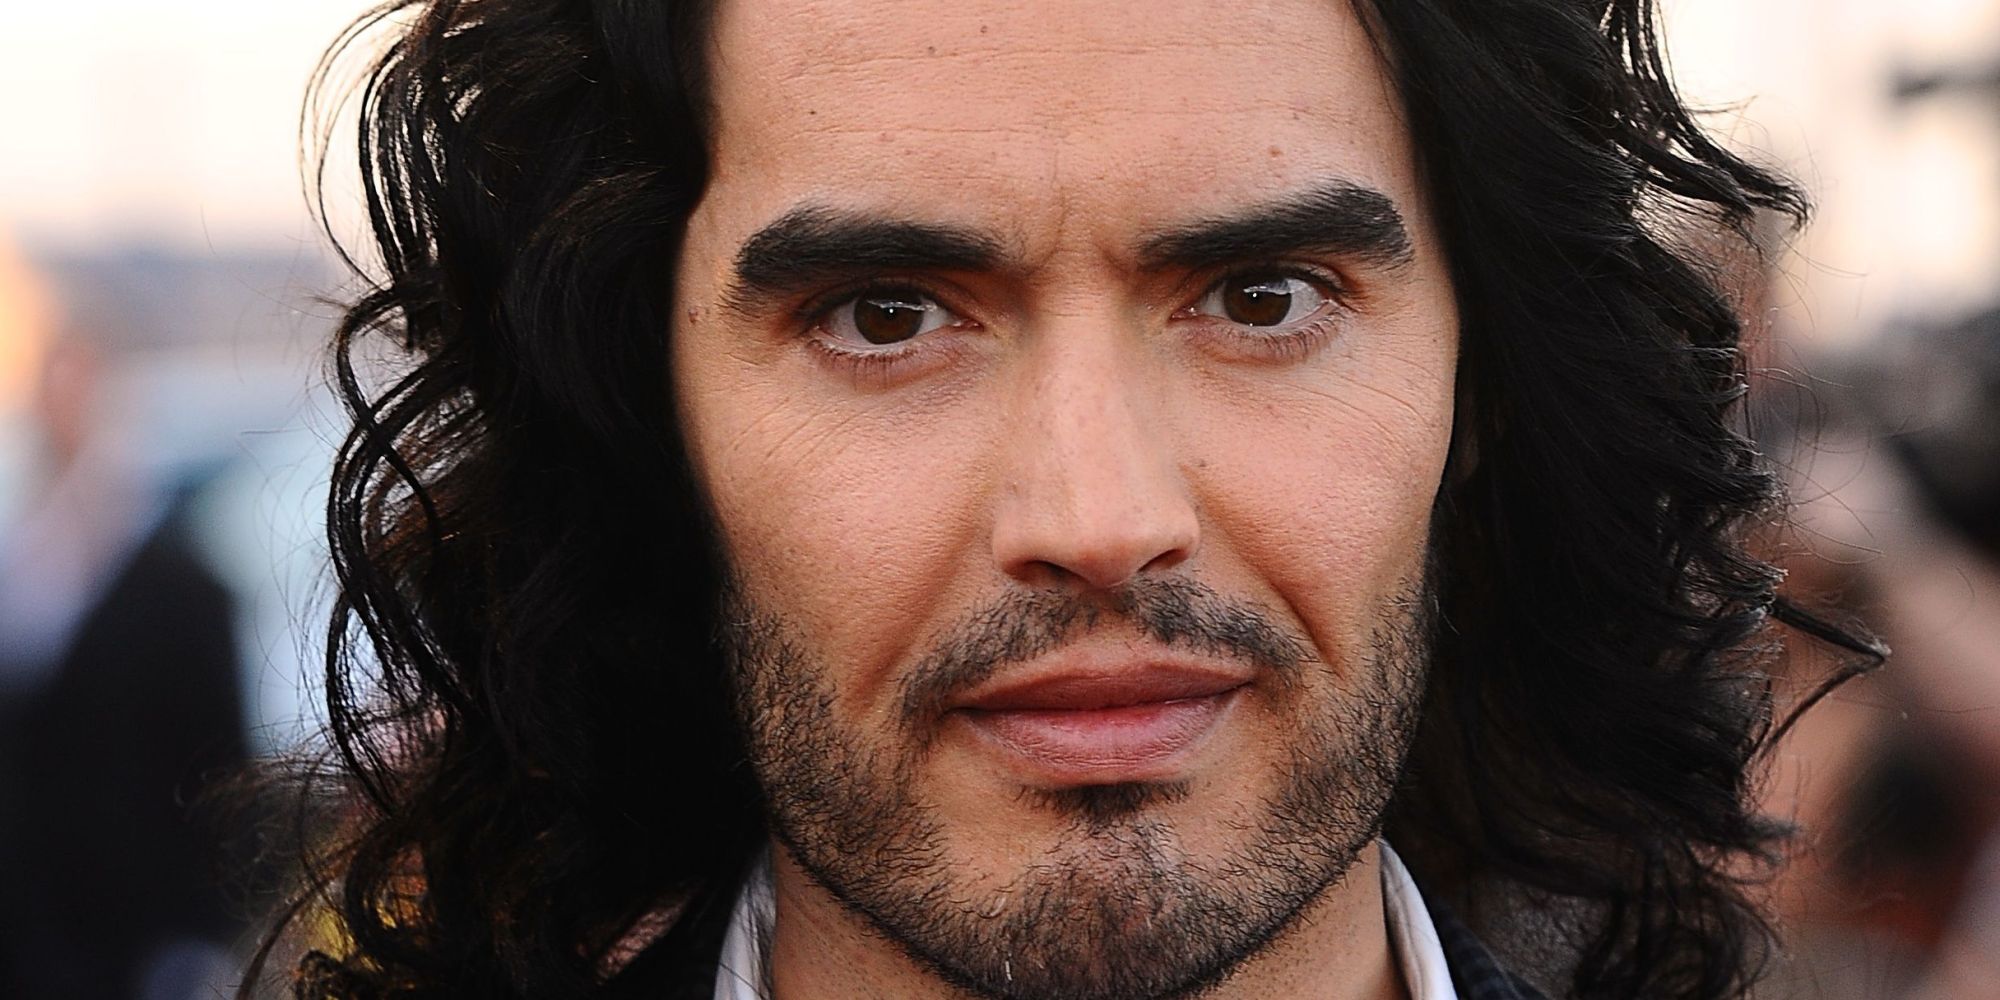 Russell Brand ‘Rants About Comic Relief', Days After Fronting BBC Red